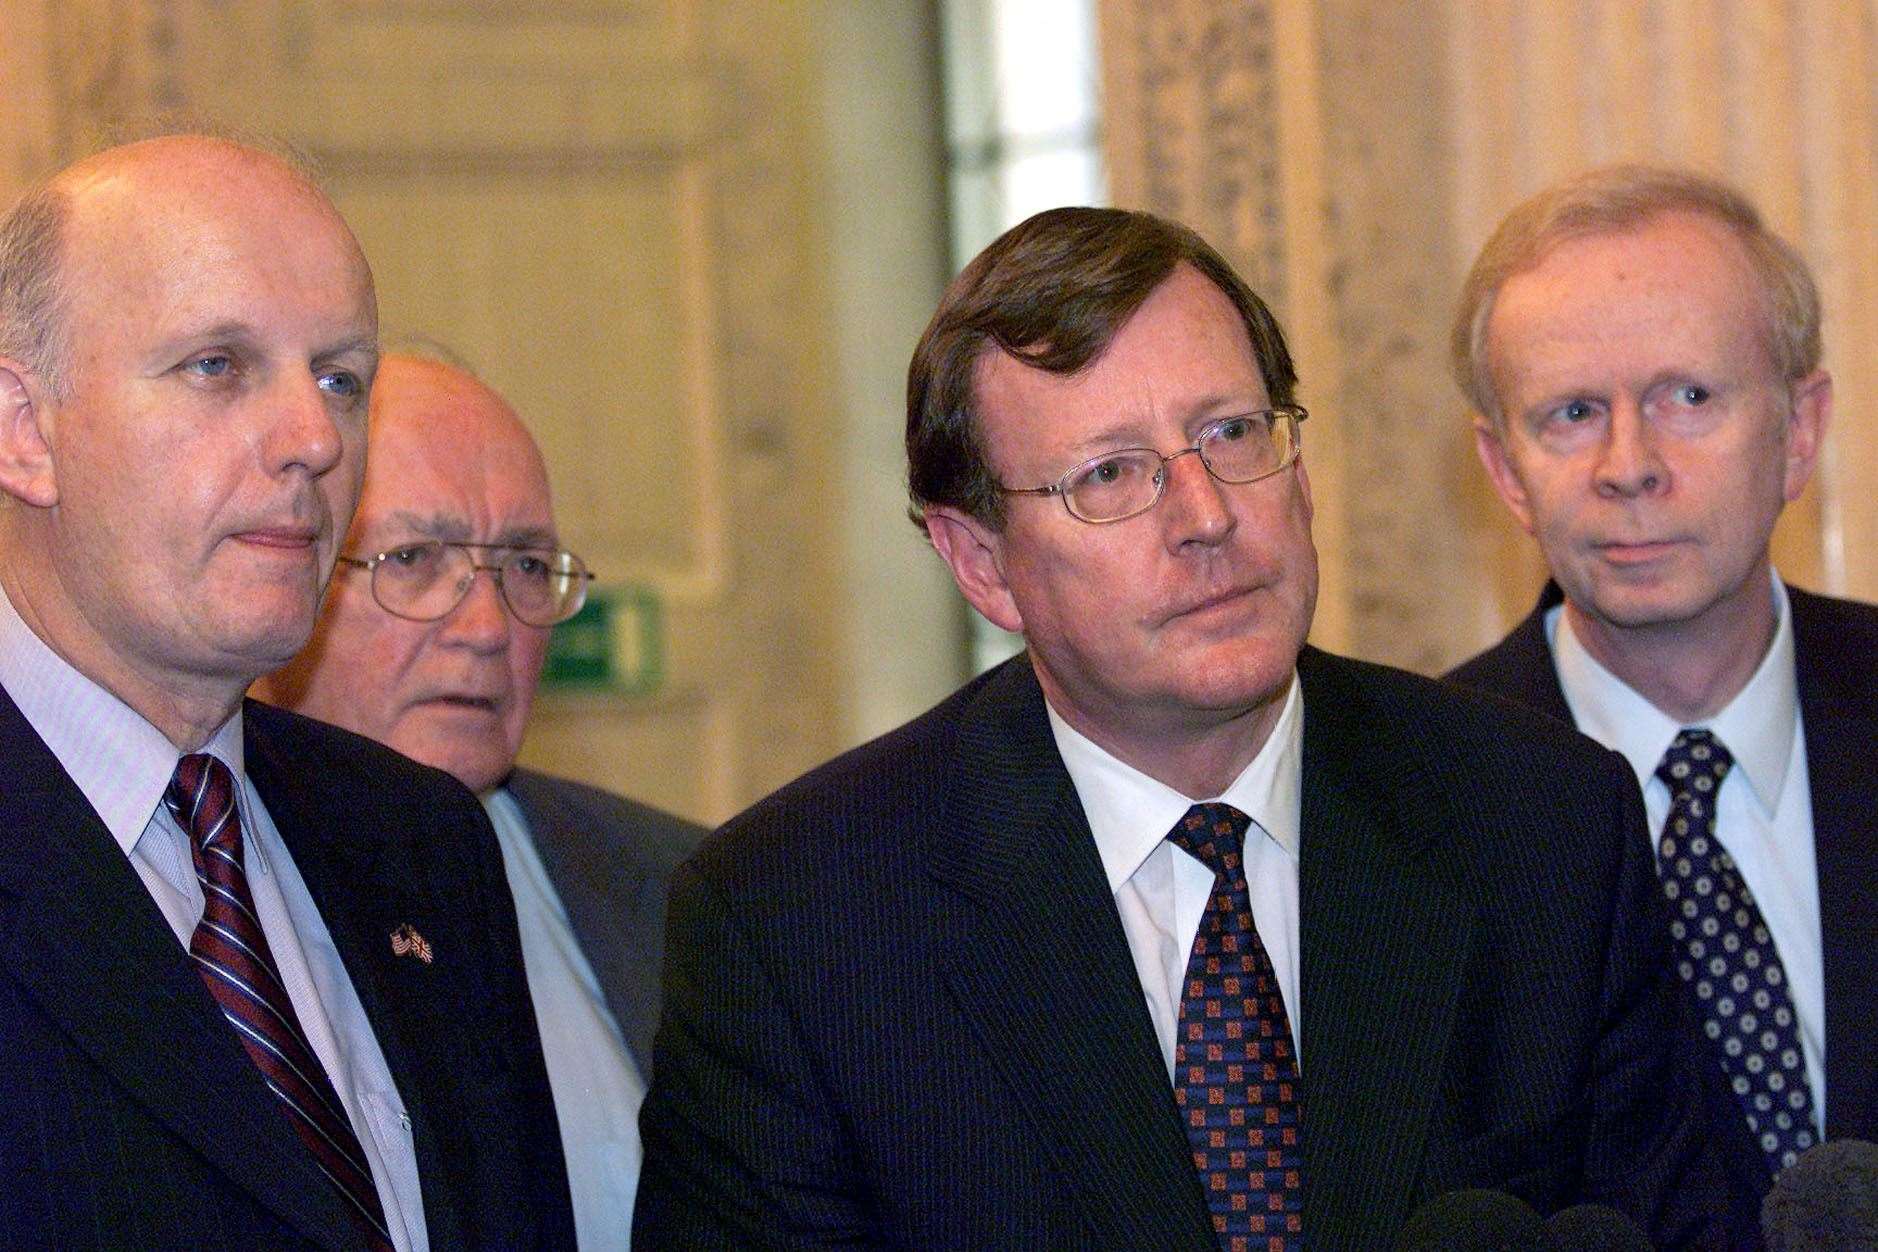 Ulster Unionist leader David Trimble with his ministers (PA)